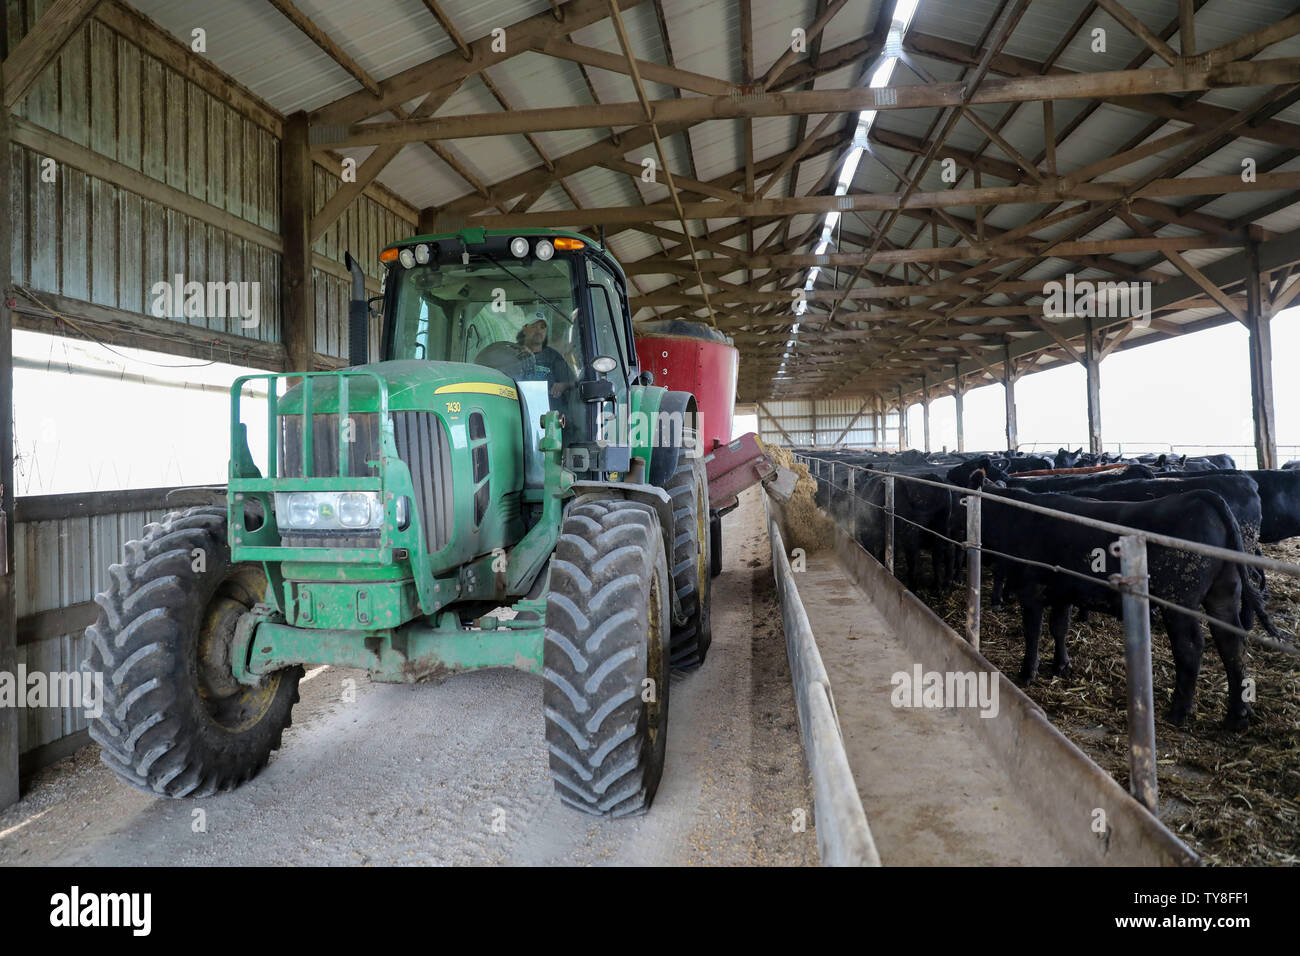 Atlantic, USA. 18th June, 2019. Bret Pellett, son of farm owner Bill Pellett, adds feeds for cattle at their family farm in Atlantic, a small city in the Midwestern state of Iowa, the United States, June 18, 2019. From cattle feeders in Iowa to pecan growers in Georgia, U.S. farmers are worrying about further damage caused by market uncertainties as trade tensions between the world's two largest economies drag on. TO GO WITH Feature: U.S. farmers frustrated by damage caused by tariff uncertainties Credit: Wang Ying/Xinhua/Alamy Live News Stock Photo